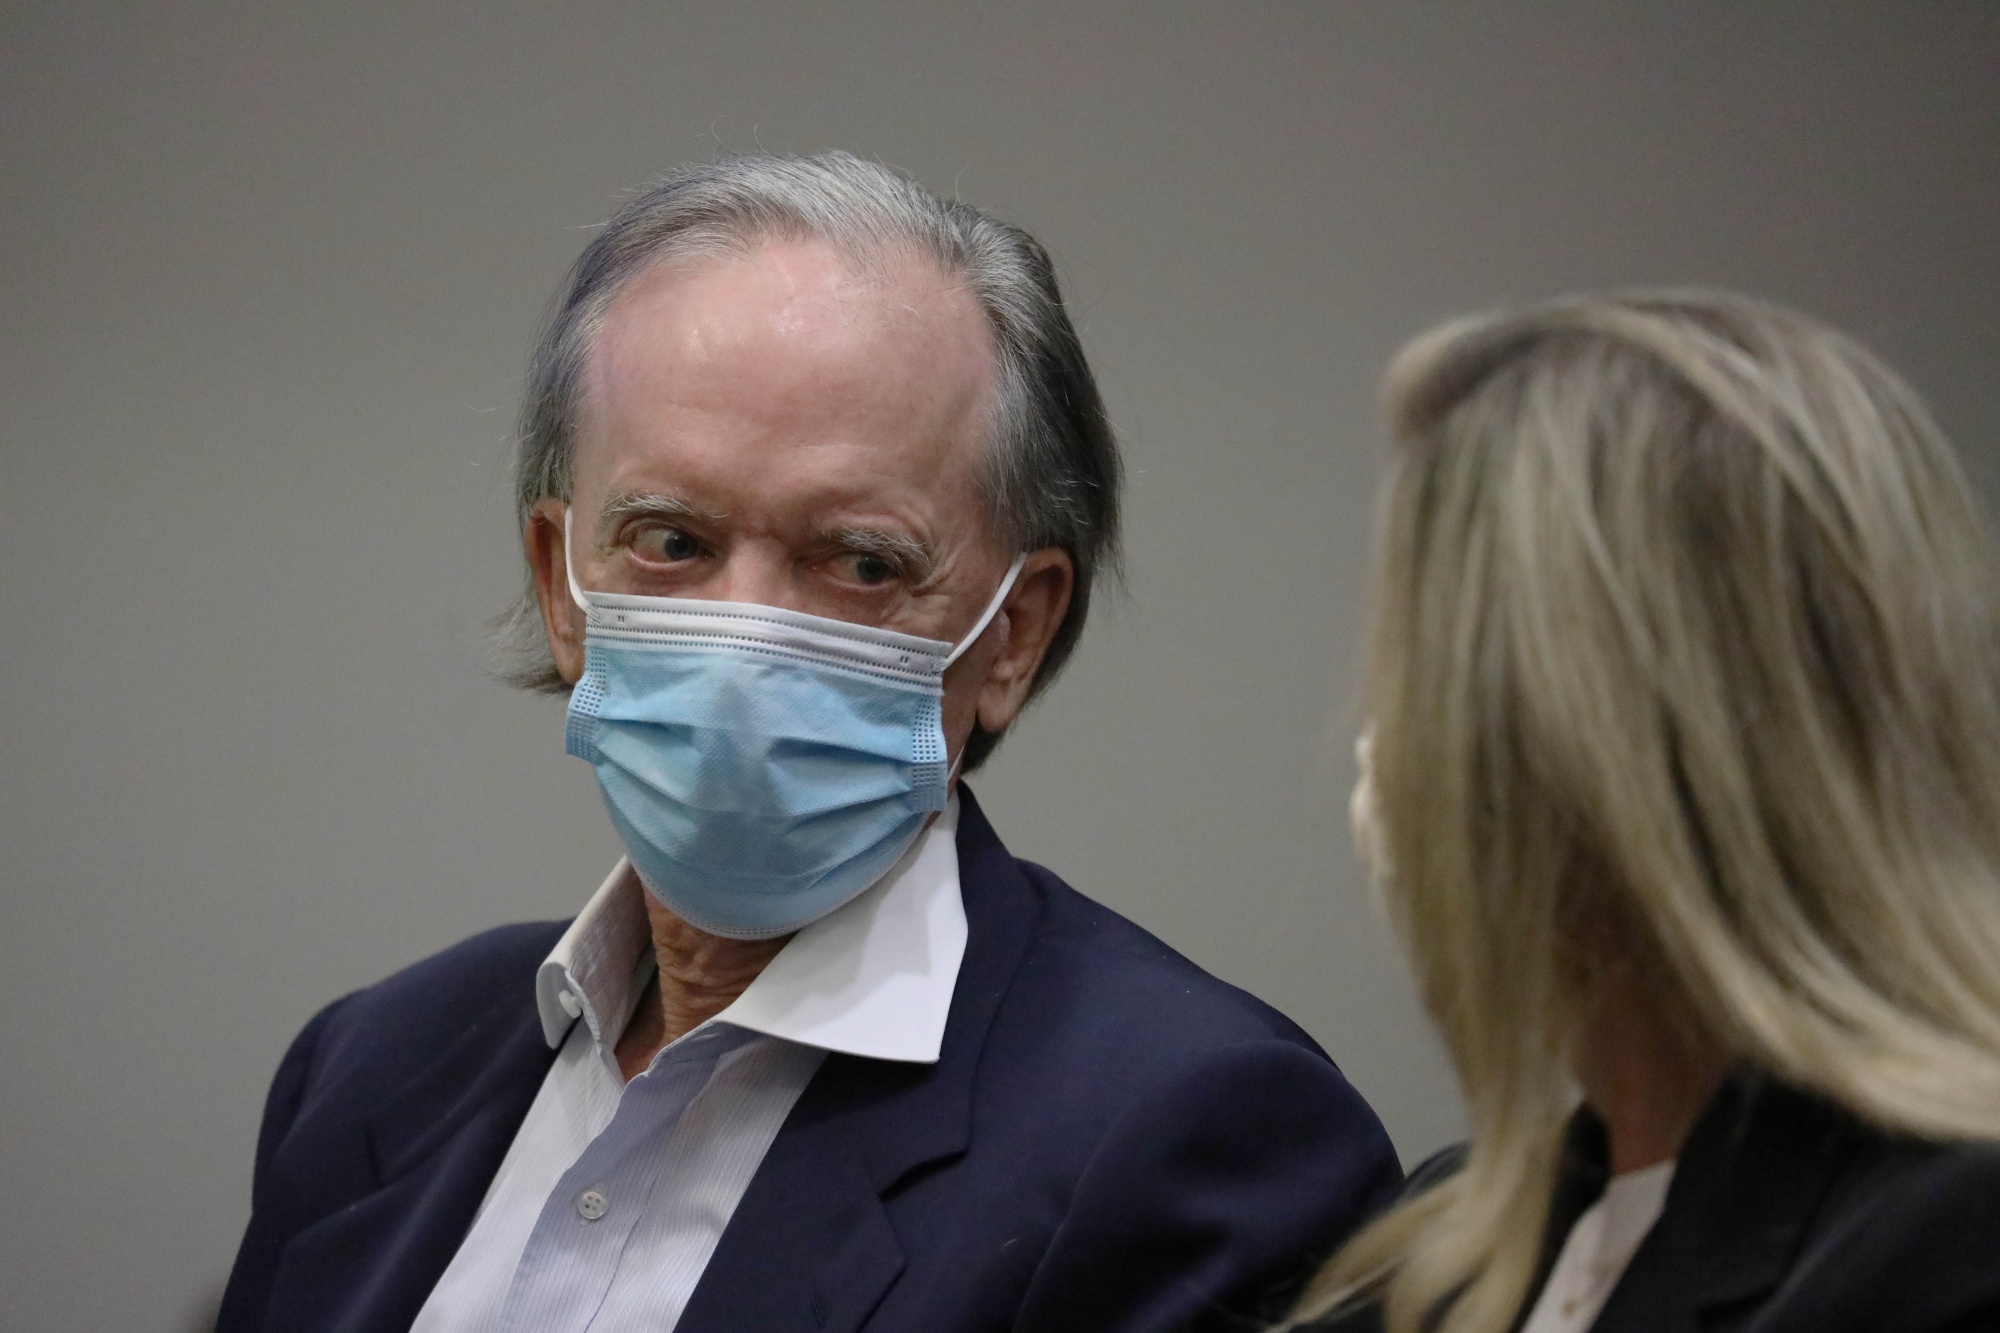 Bill Gross, co-founder of Pacific Investment Management Co. (PIMCO), left, and wife Amy Gross at state court in Santa Ana, California, U.S.